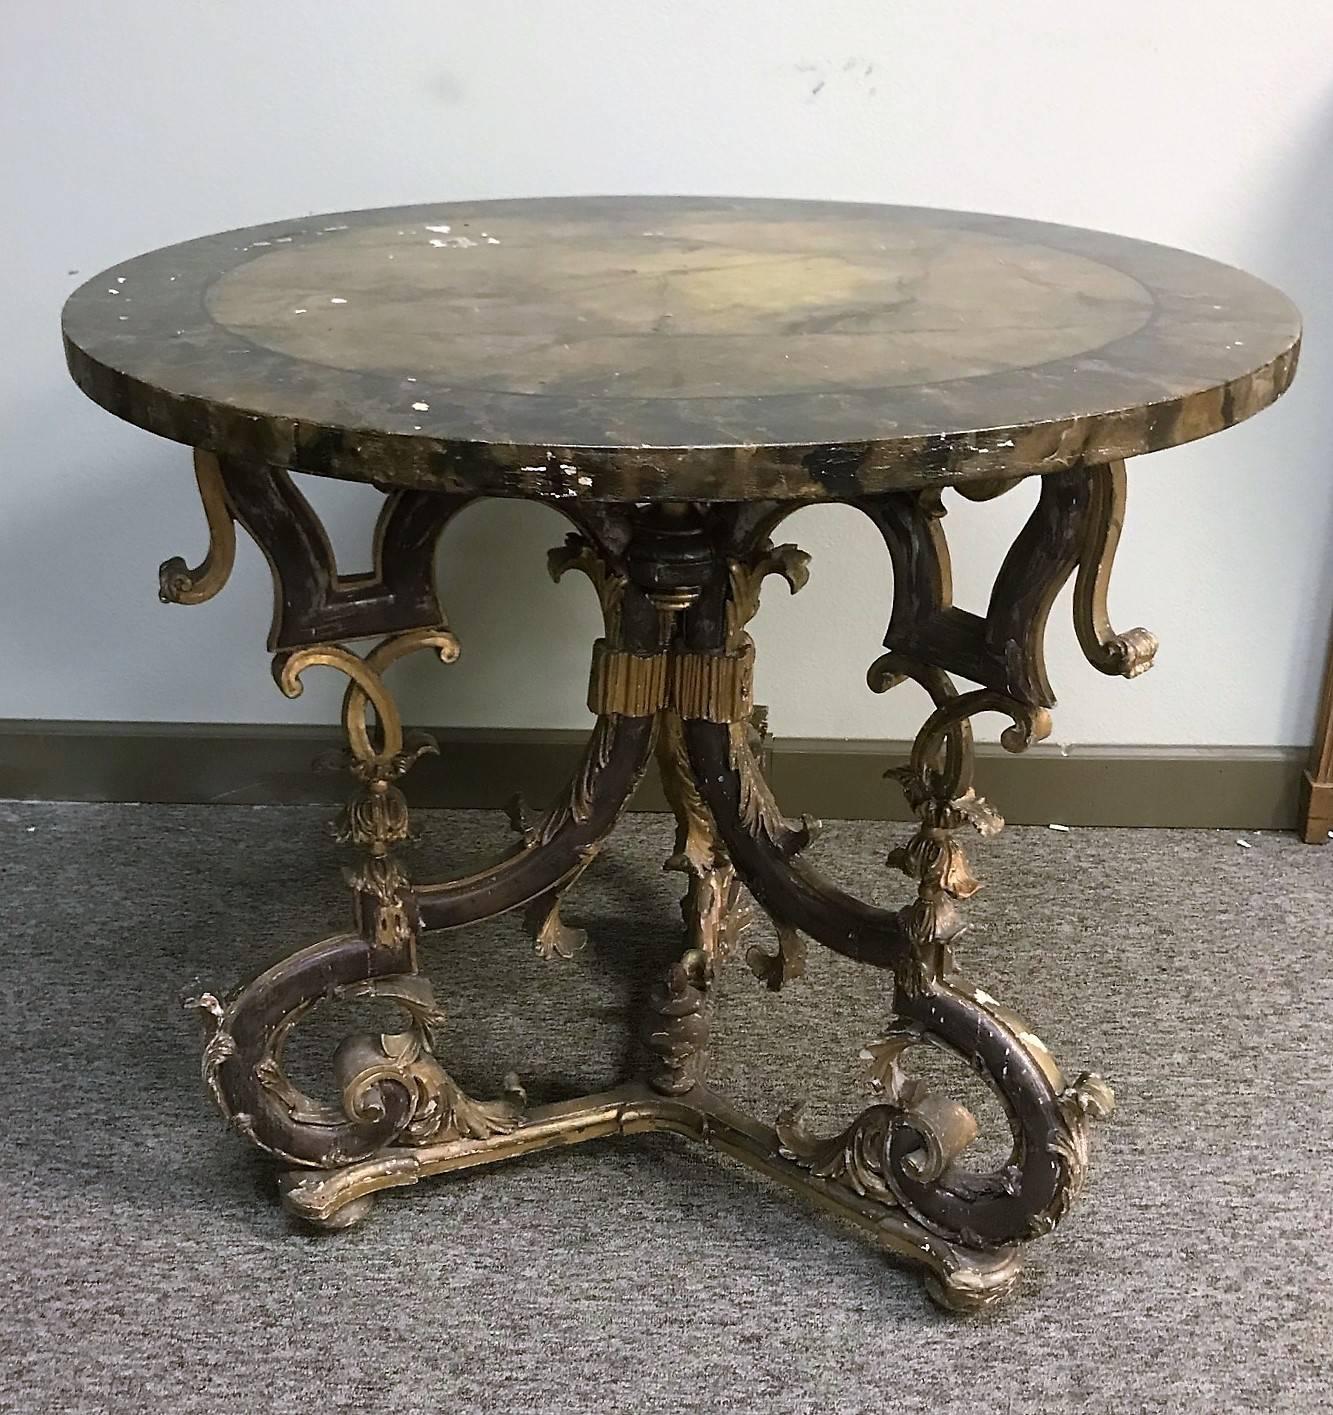 Outstanding 19th century Italian Baroque centre table with a faux marble top. The parcel giltwood pedestal base ornately carved and reticulated with geometric and free-flowing open designs with scrolling leaves and stylized tassels,

circa